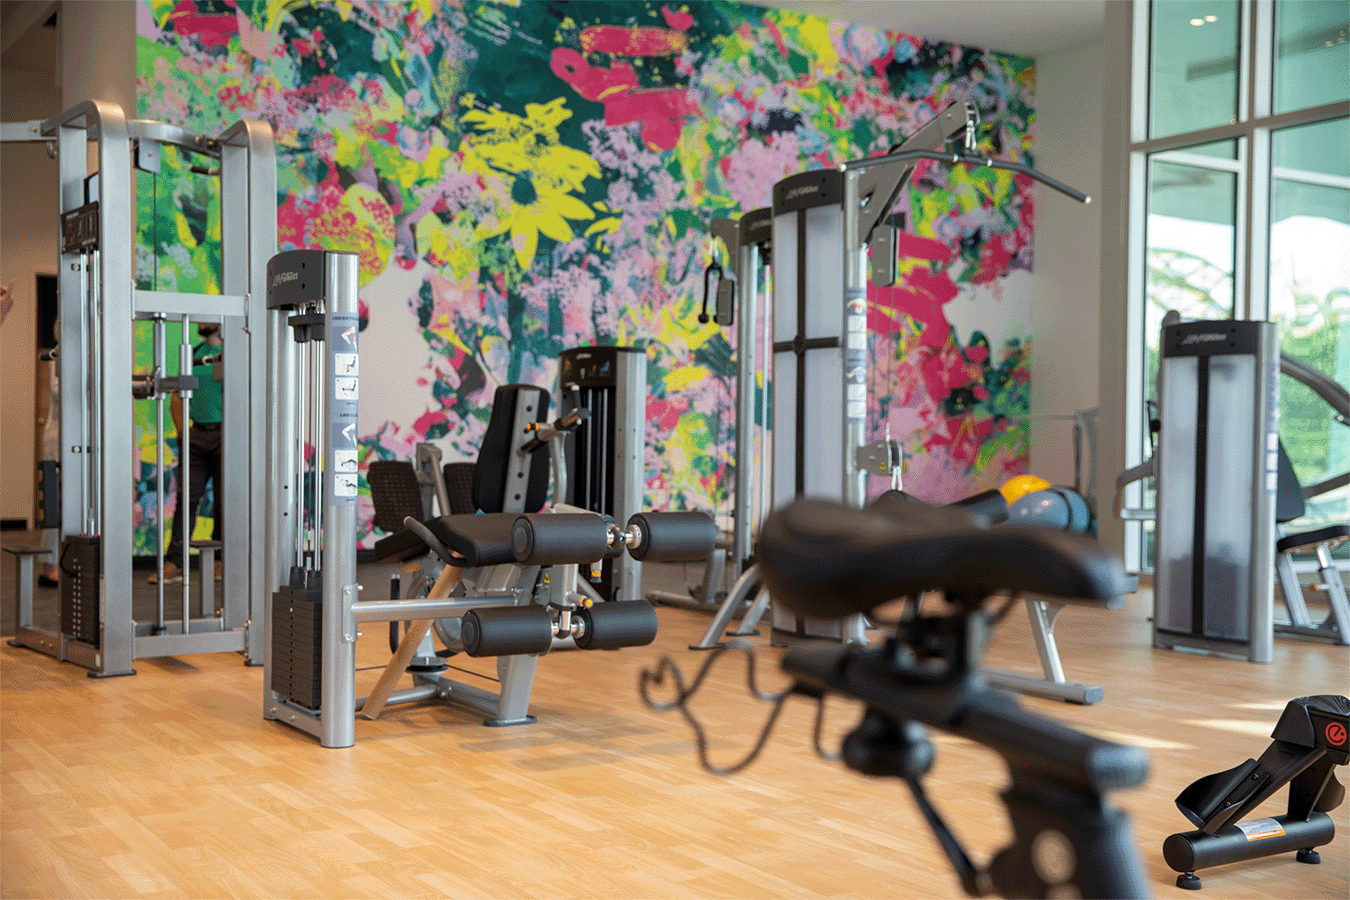 workout equipment with mural in the background